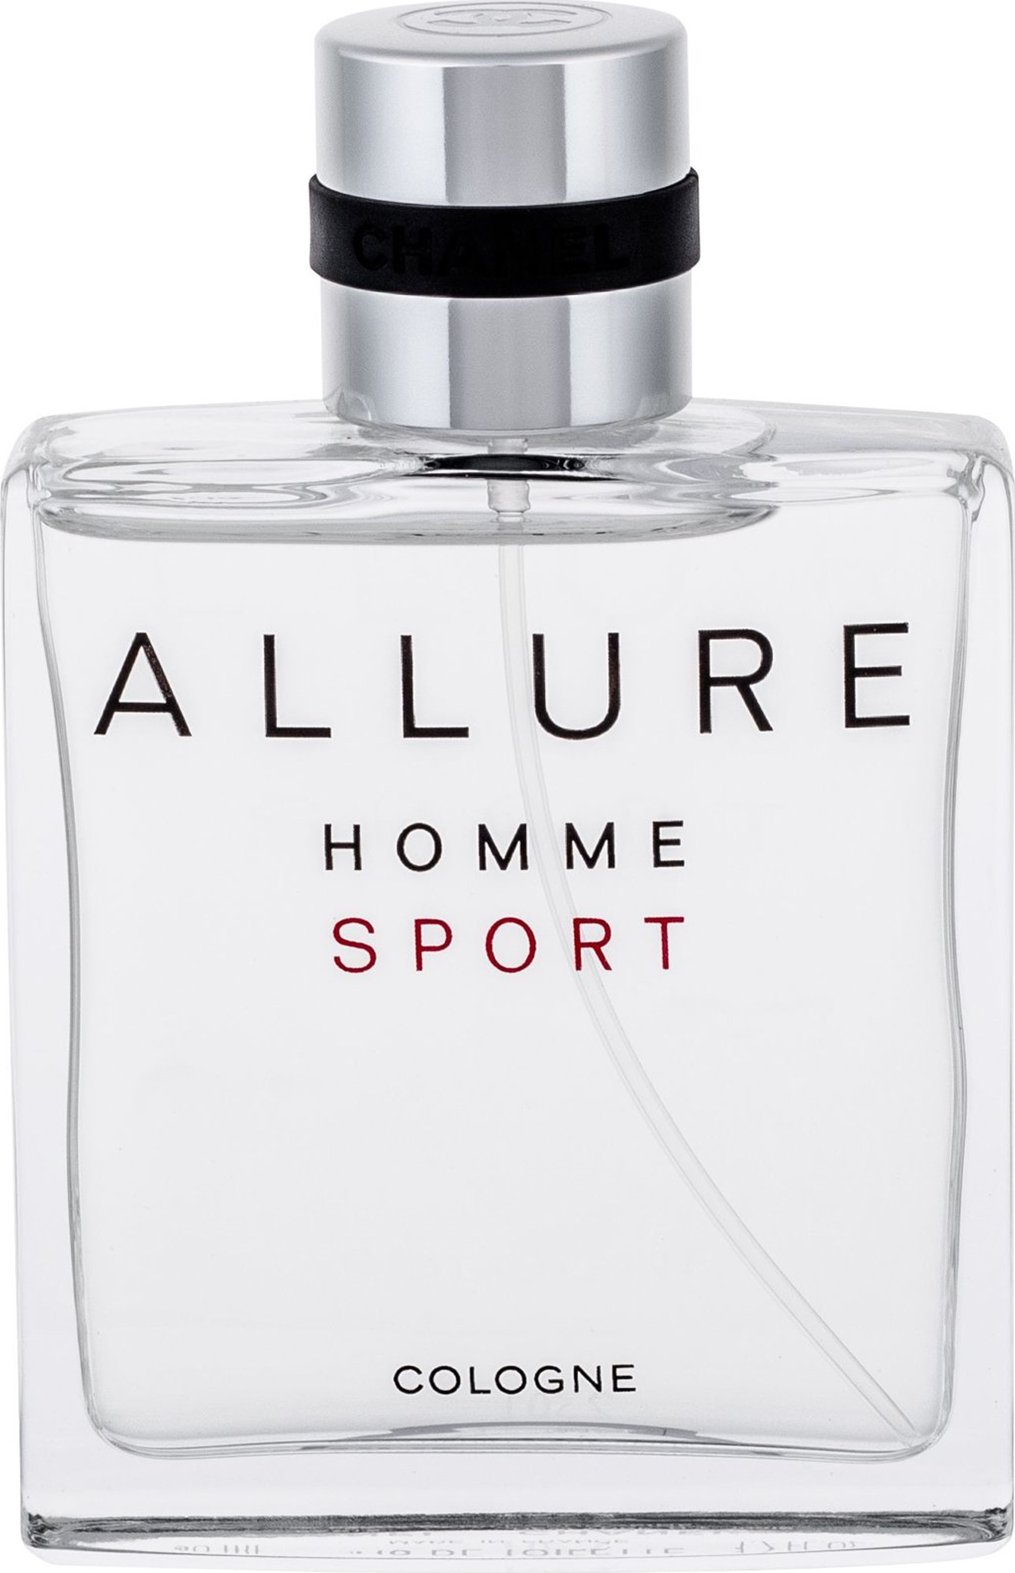 Allure homme cologne. Chanel Allure Sport 100 ml. Chanel Allure homme Sport Cologne 100 ml. Chanel Allure homme Sport 50ml. Chanel Allure Sport Cologne 50ml.